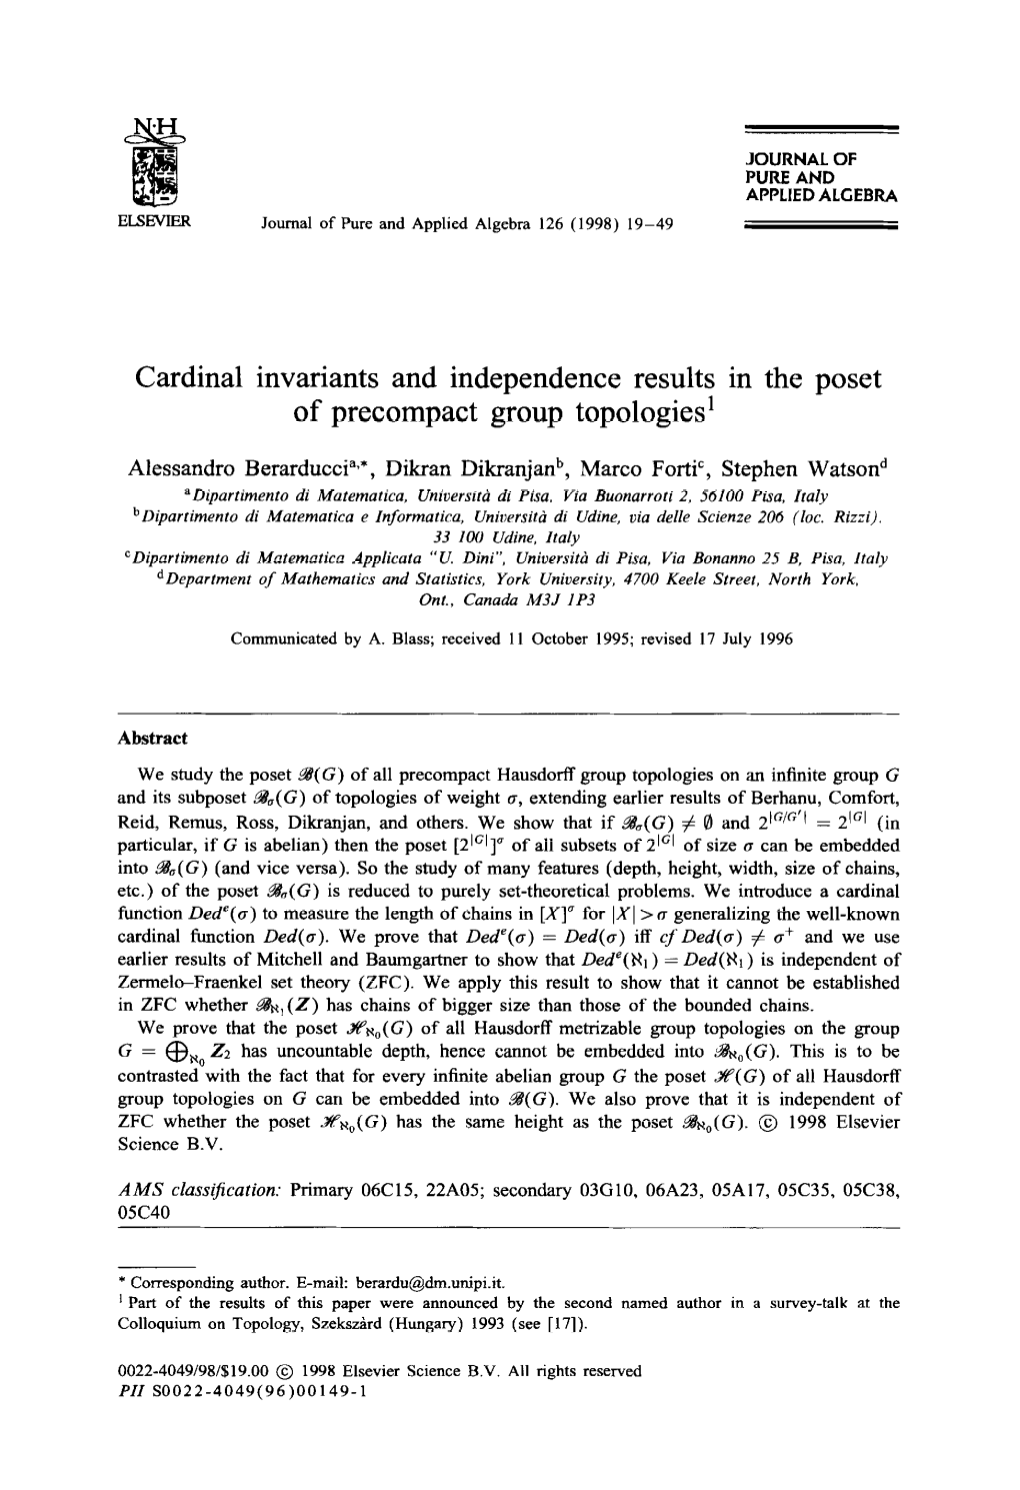 Cardinal Invariants and Independence Results in the Poset of Precompact Group Topologies’